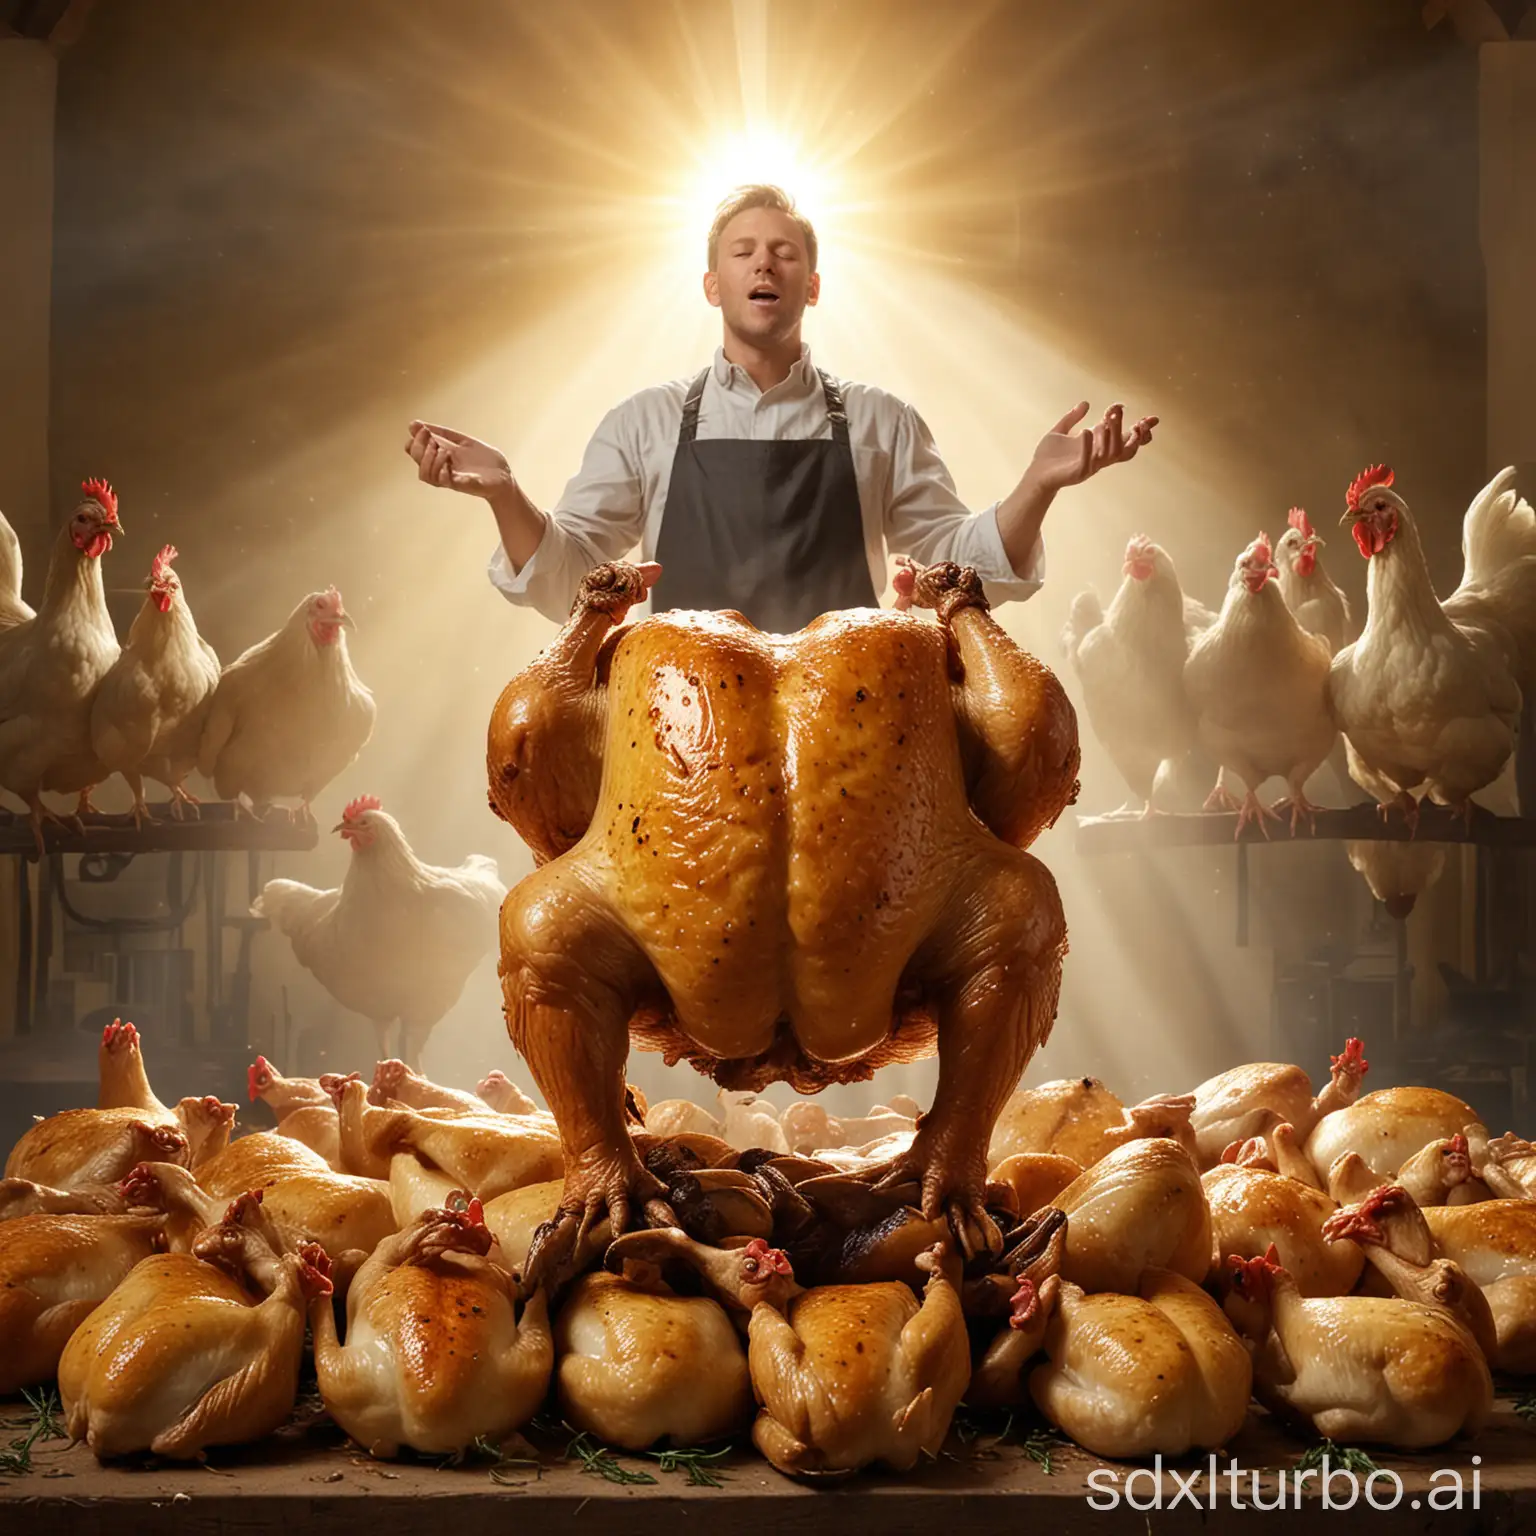 Roast Chicken God, in his divinity with light coming from it. And a multitude of chickens are worshipping
